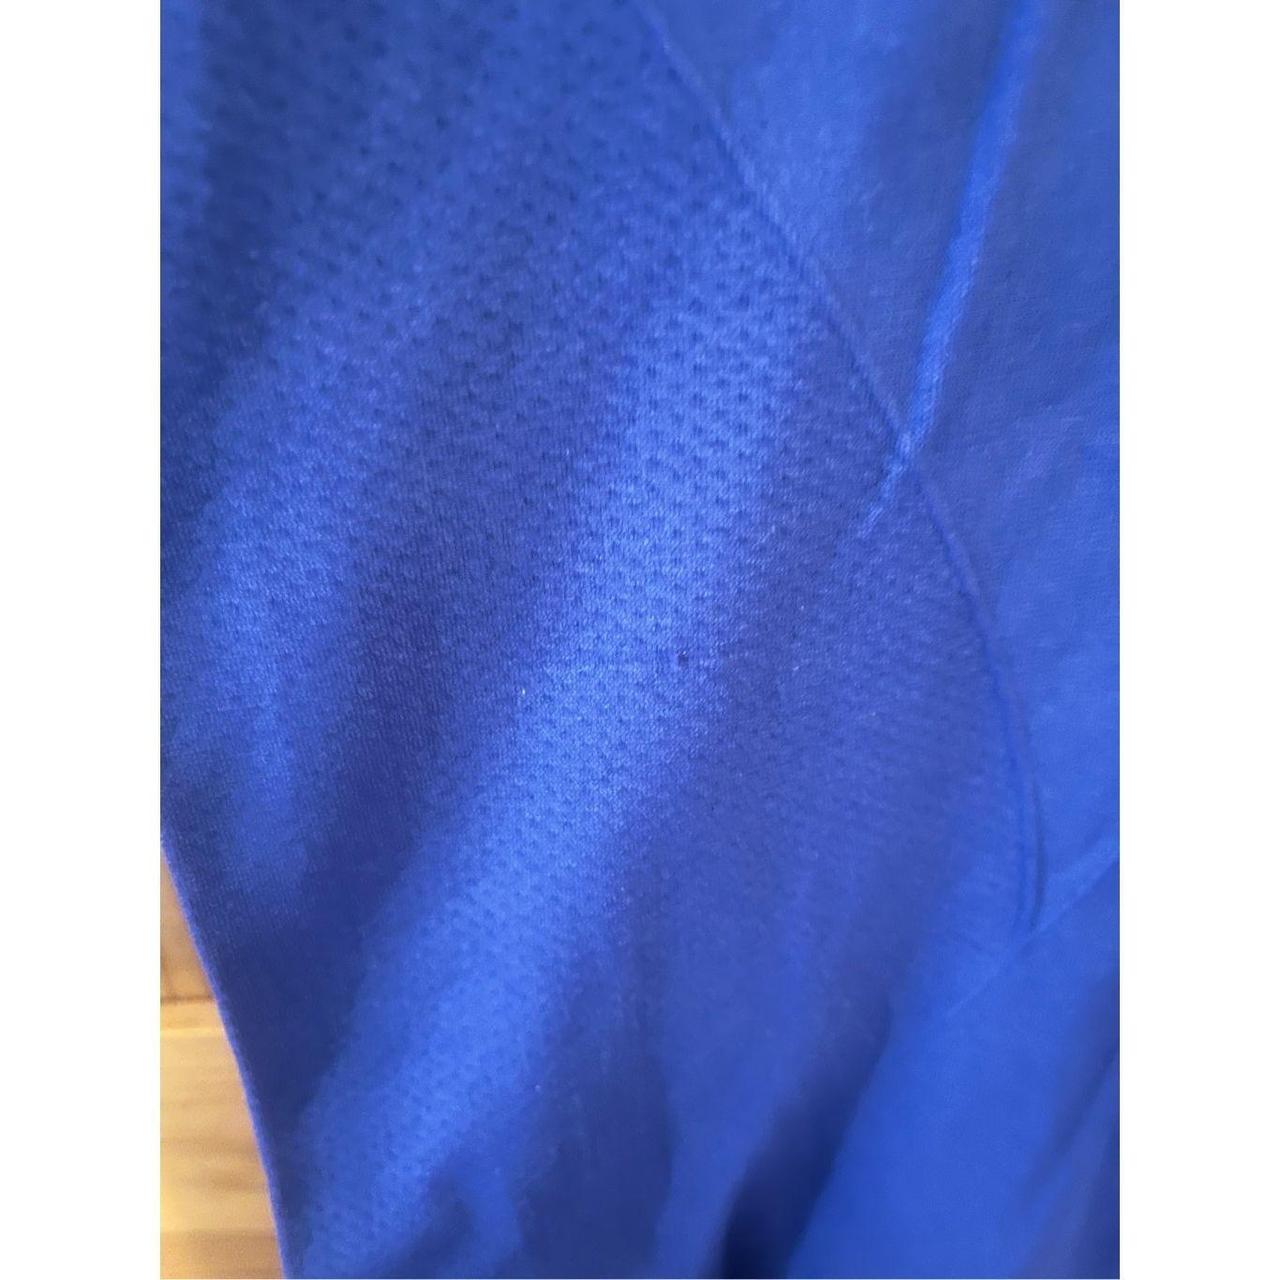 Danskin Now Fitted Athletic Shirt Womens Large Blue - Depop